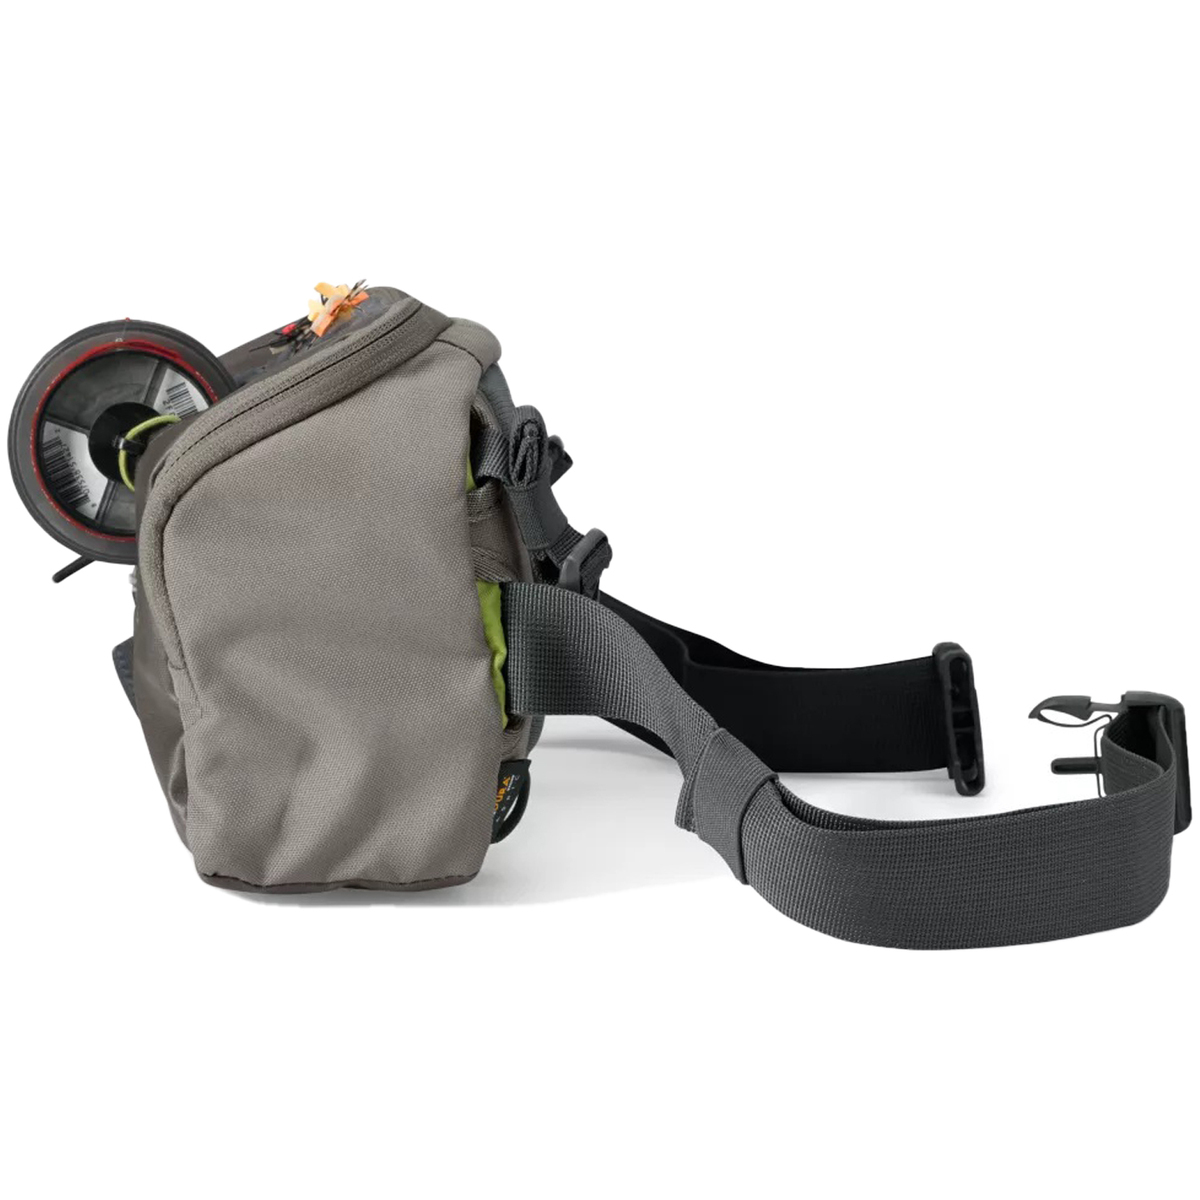 Orvis Angler Pack Tackle Chest Pack - Sand | Sportsman's Warehouse